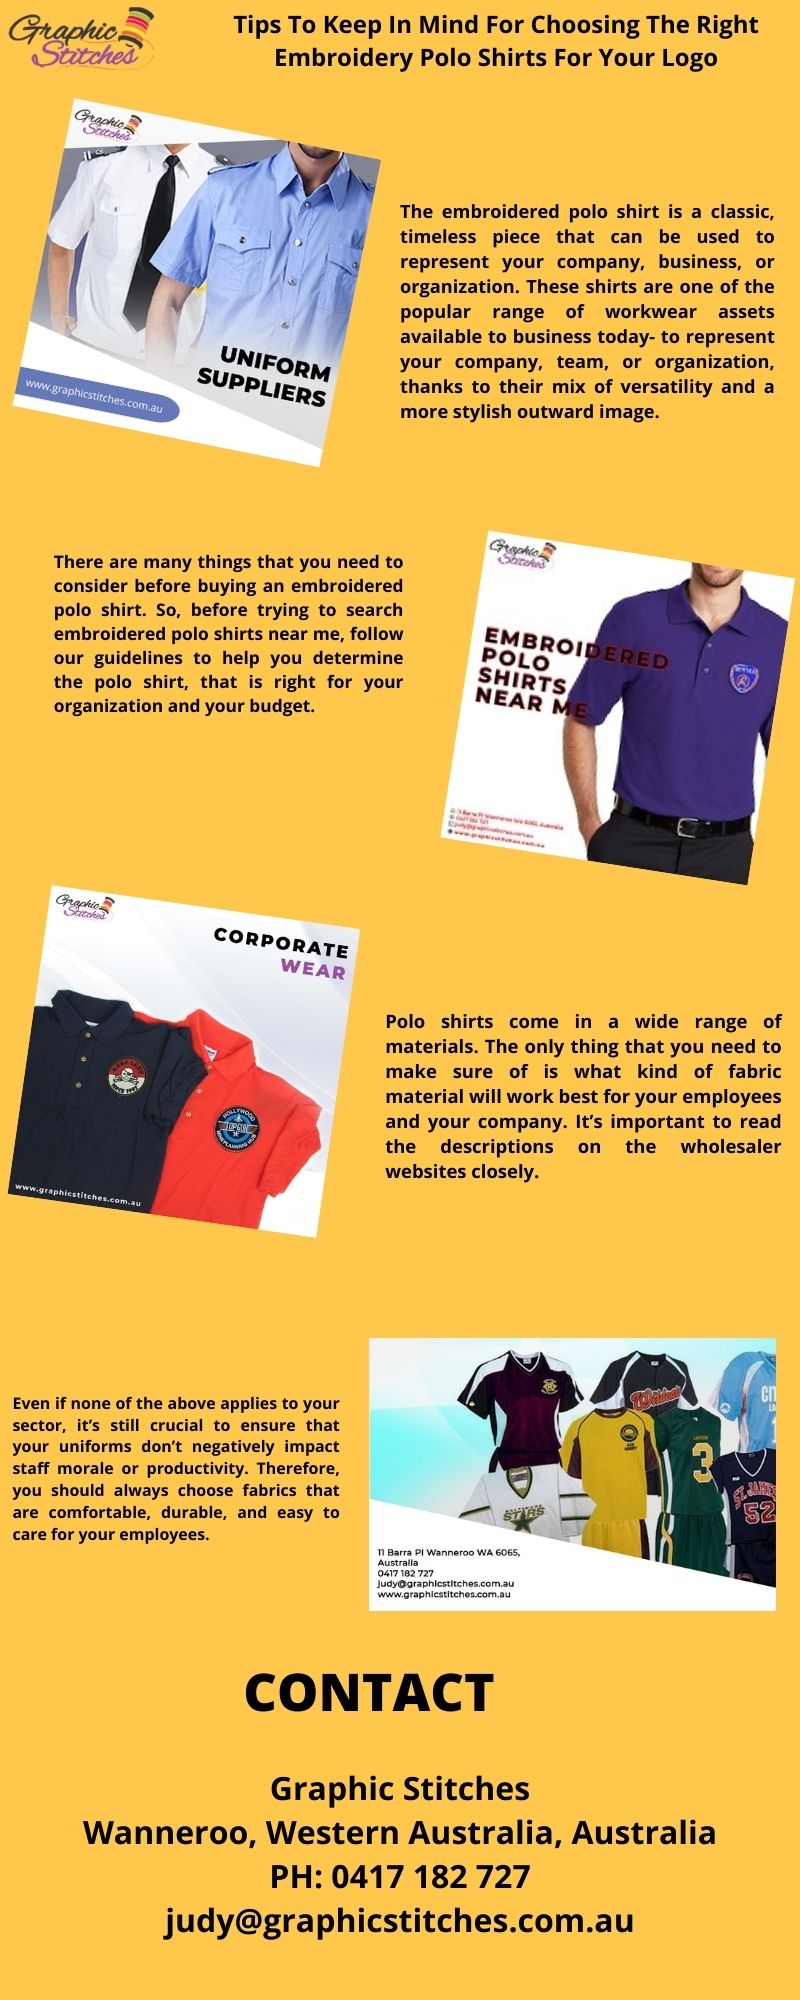 Tips To Keep In Mind For Choosing The Right Embroidery Polo Shirts For Your Logo.jpg The embroidered polo shirt is a classic, timeless piece that can be used to represent your company, business, or organization. Visit: https://www.graphicstitches.com.au/polo-shirts.html
 by Graphicstitch